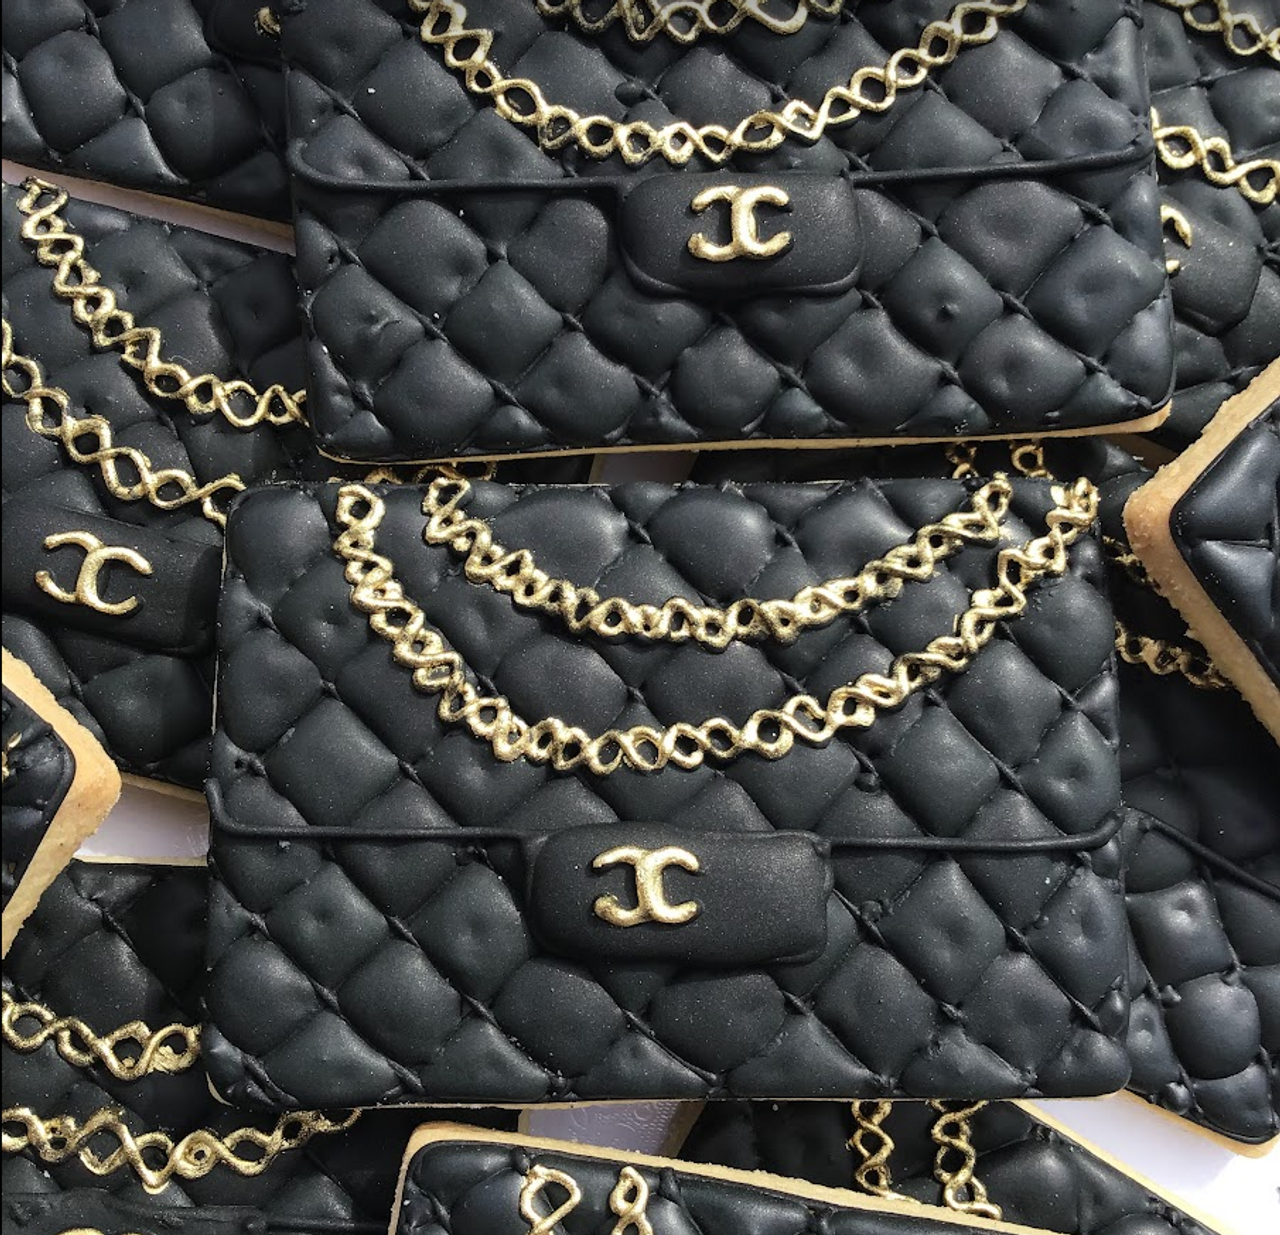 Chanel Bag Icing Cookies 9x13 Gift Platter